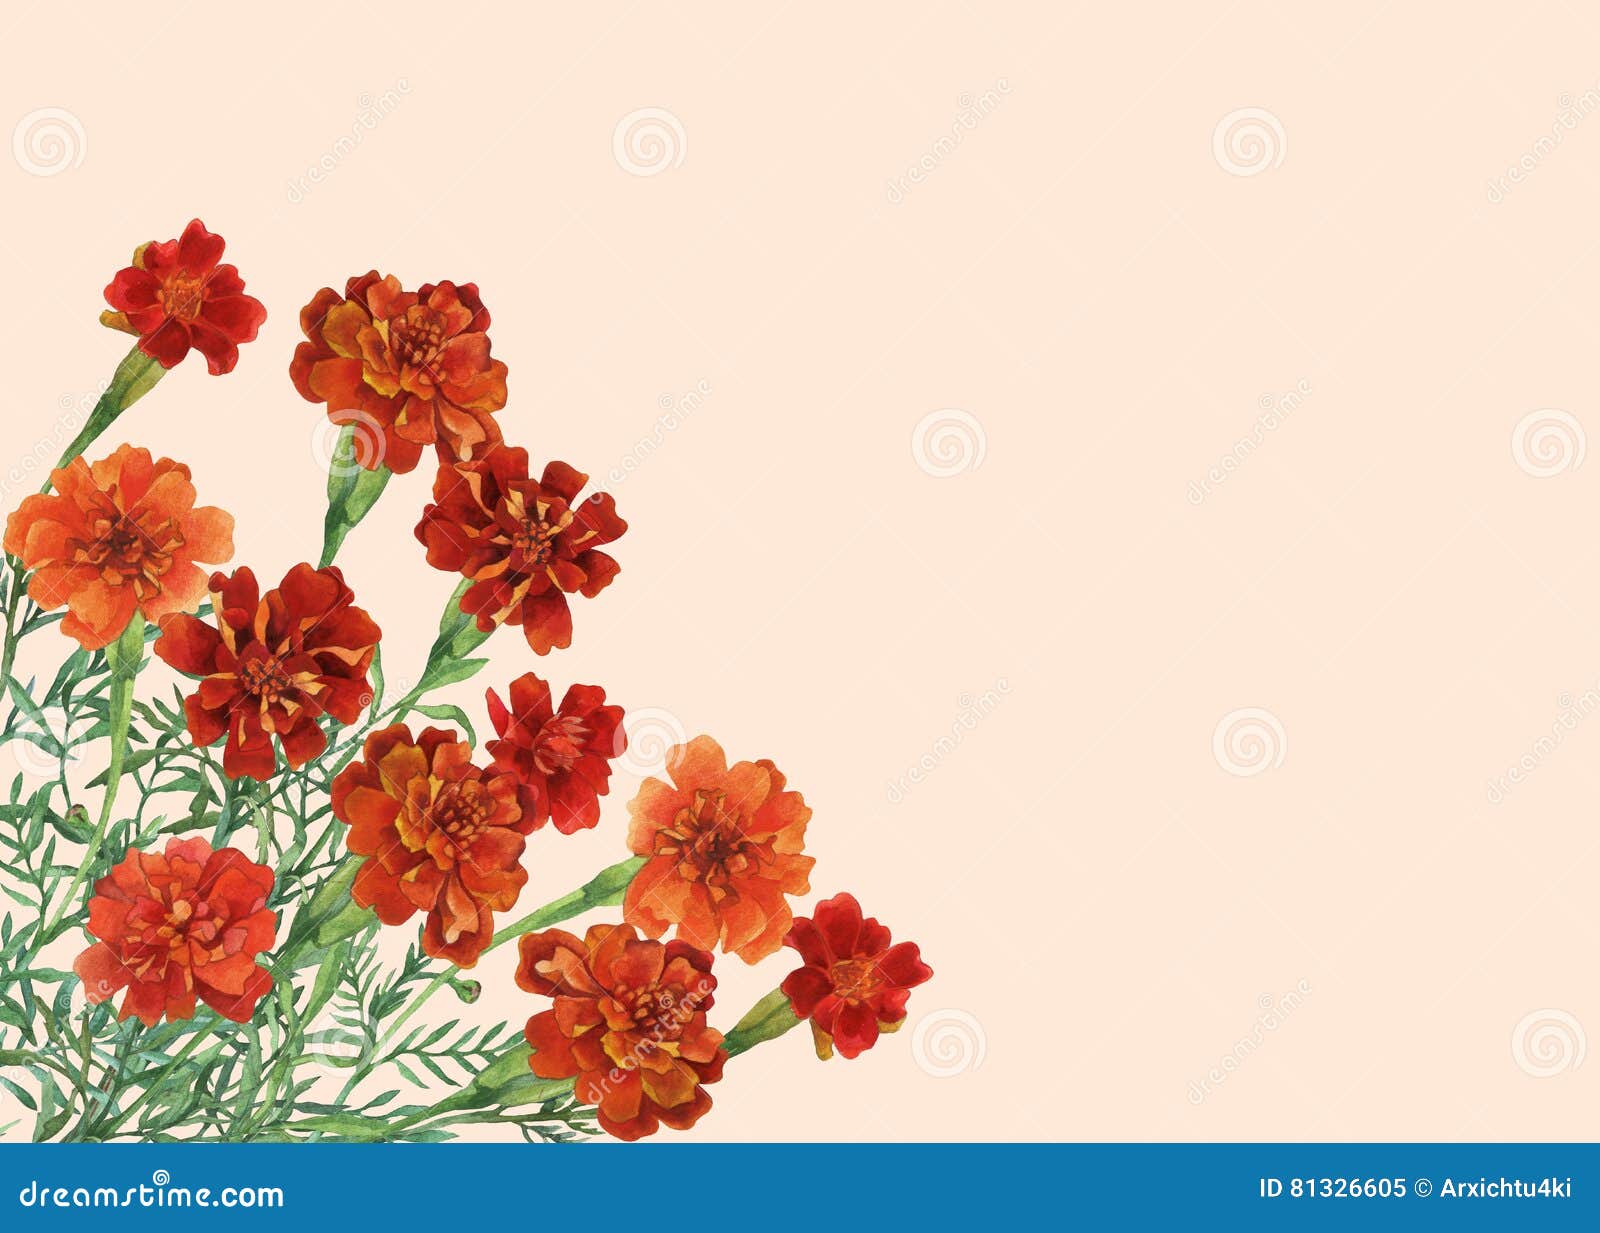 bouquet of tagetes patula, the french marigold.